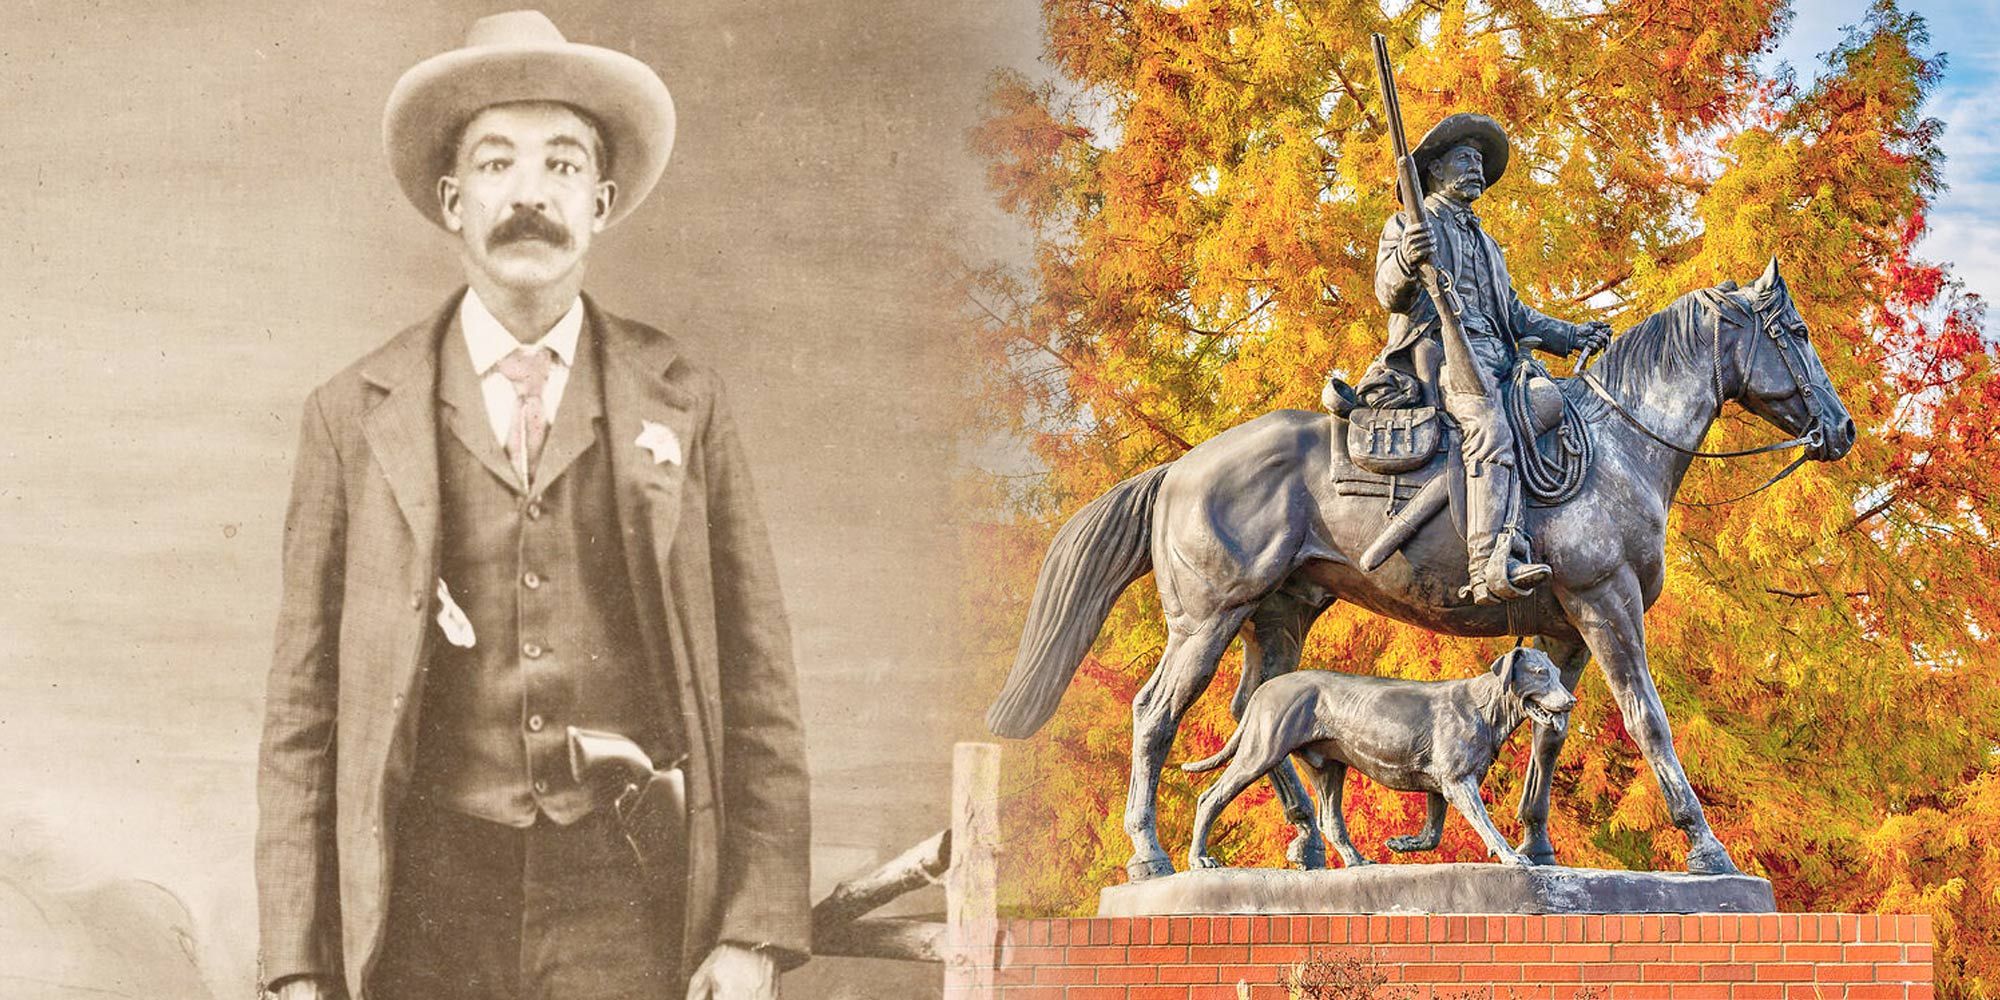 A split image of the real-life Bass Reeves and a statue of the lawman 